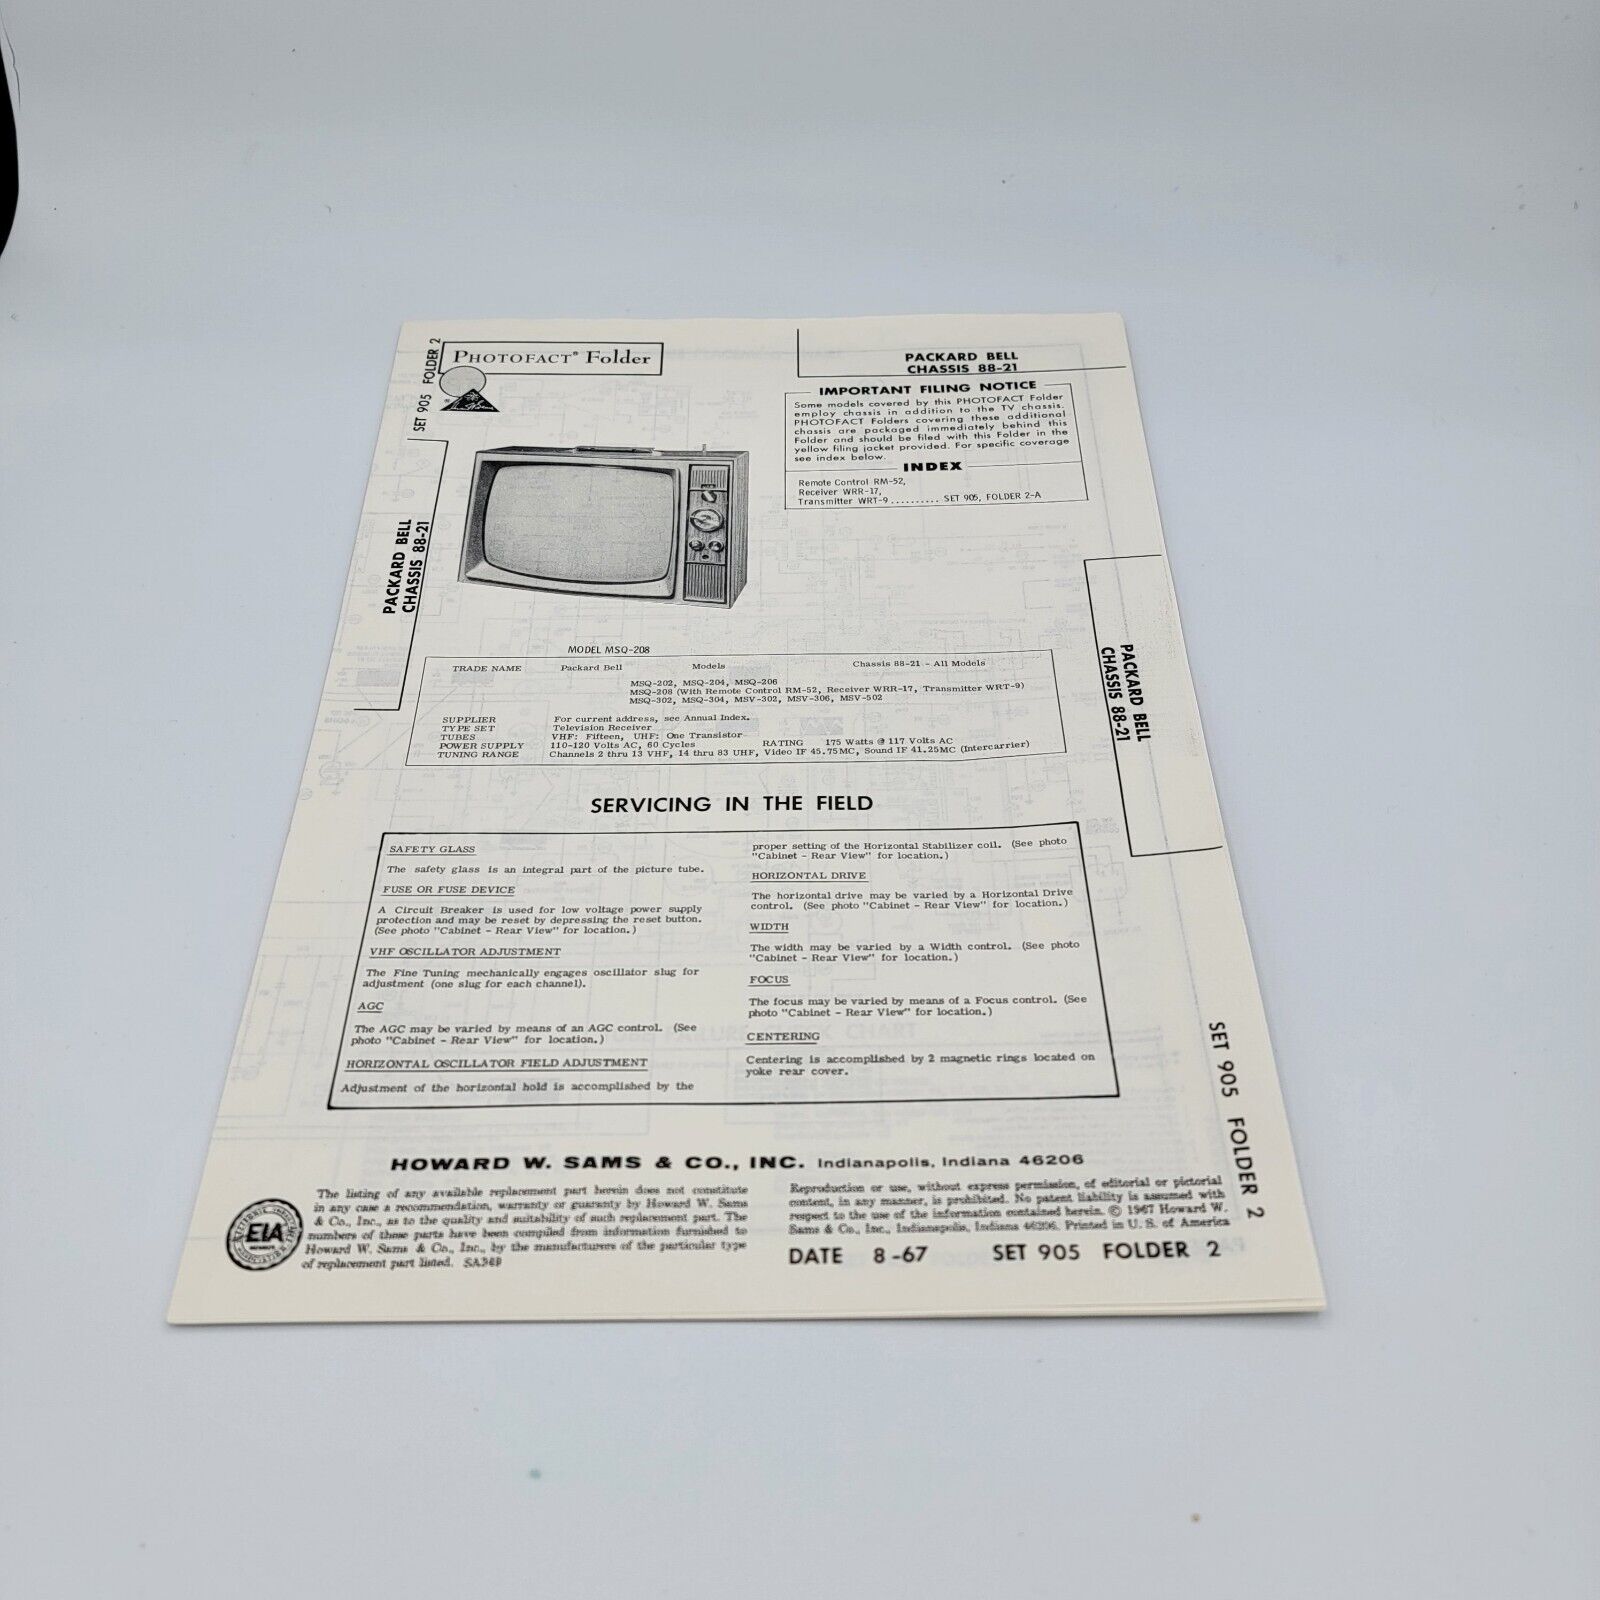 1967 Packard Bell Chassis 88-21 SERVICE MANUAL SCHEMATIC PHOTOFACT